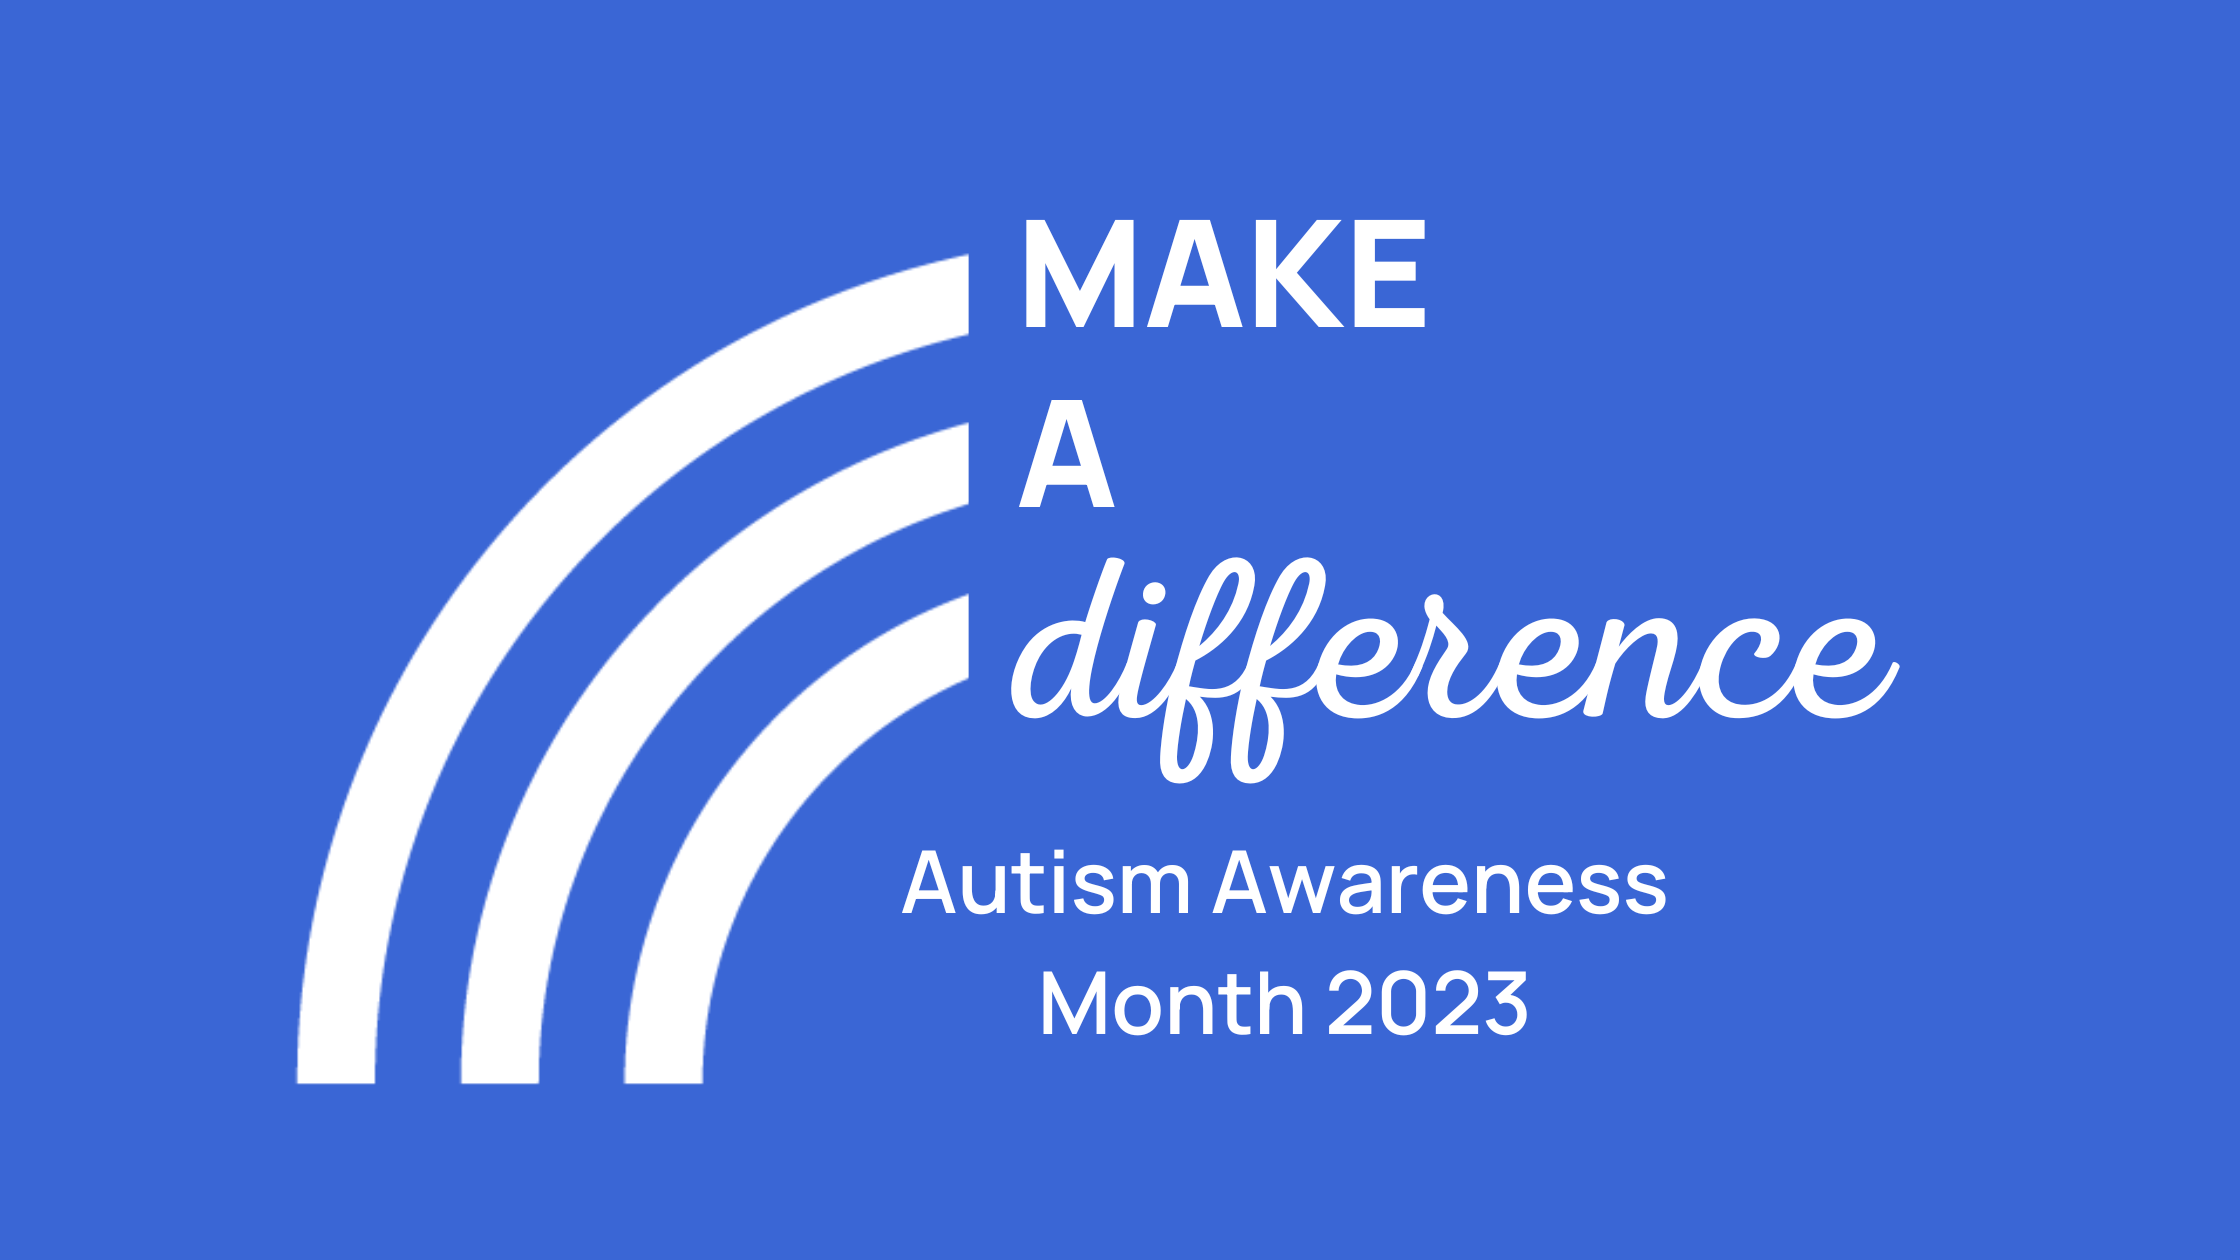 Ways to Support Autism Awareness Month 2023